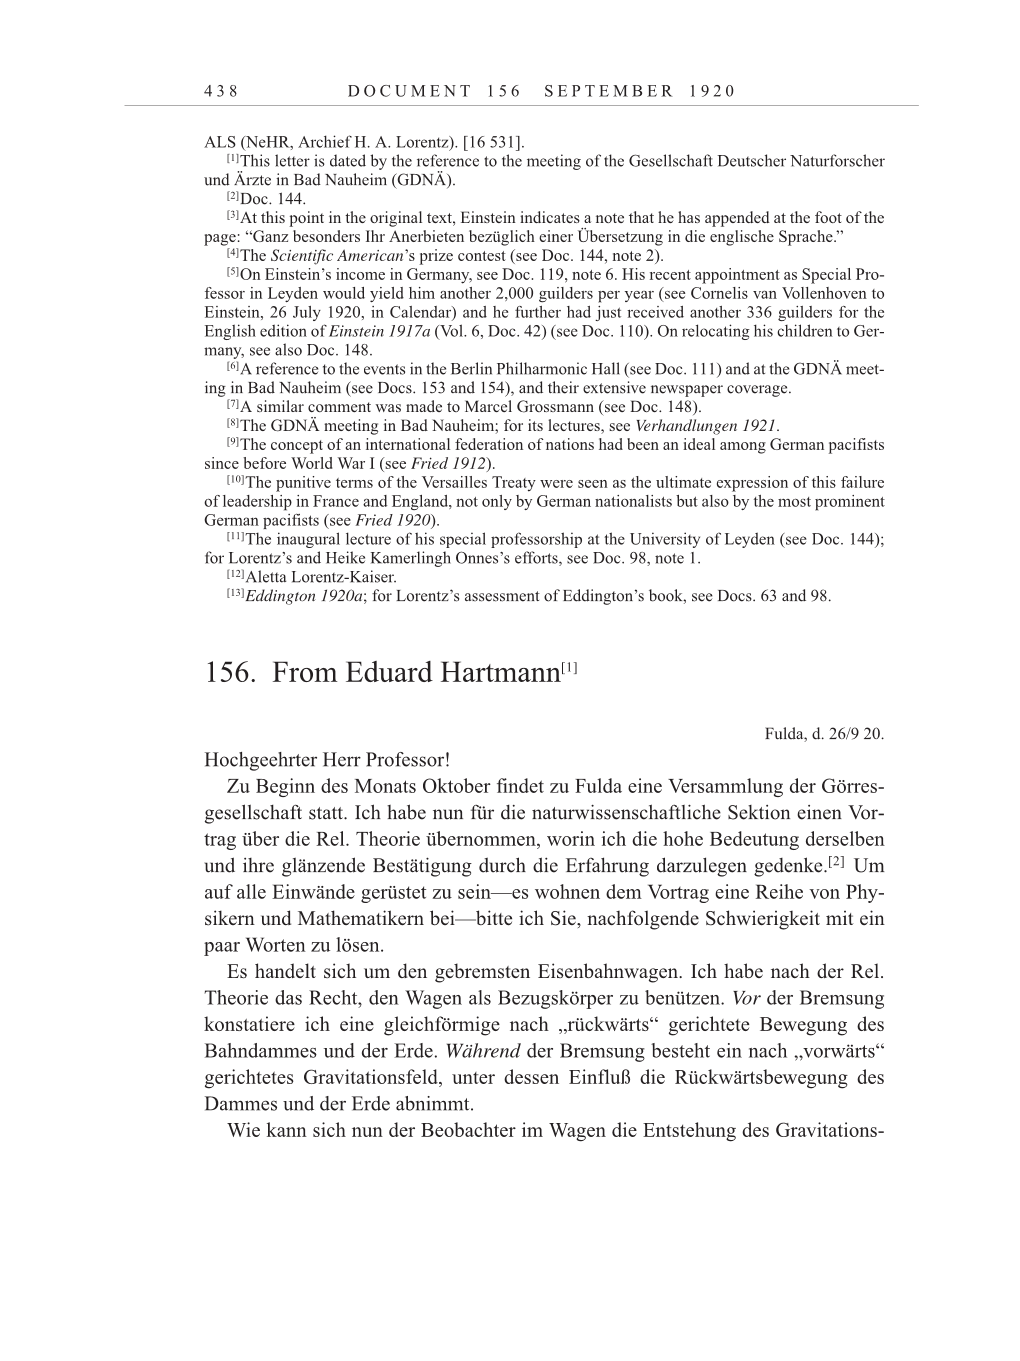 Volume 10: The Berlin Years: Correspondence May-December 1920 / Supplementary Correspondence 1909-1920 page 438